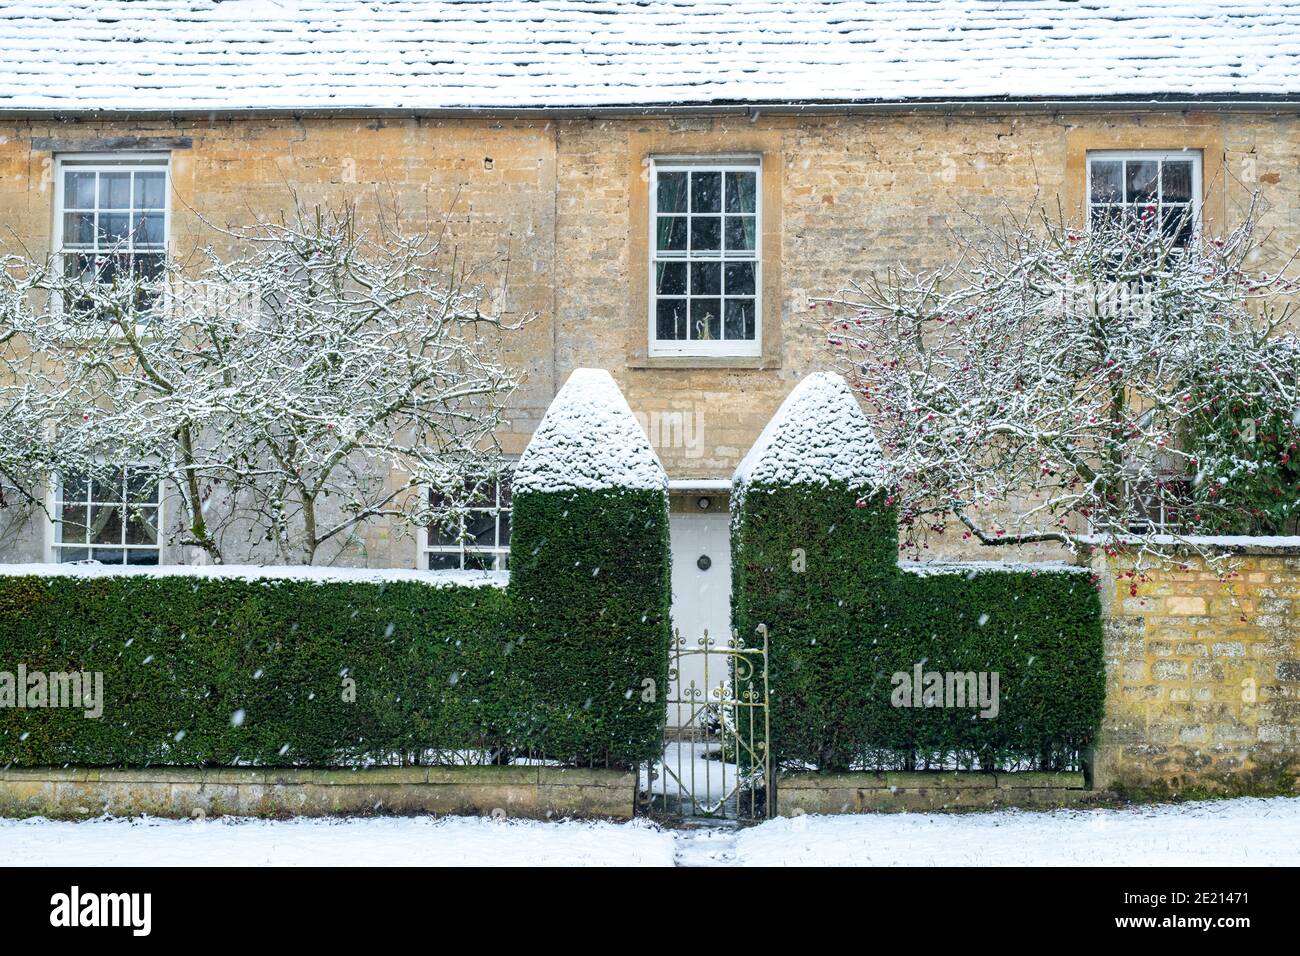 Grand cotswold stone house in the snow at Christmas. Taynton, Cotswolds, Oxfordshire, England Stock Photo